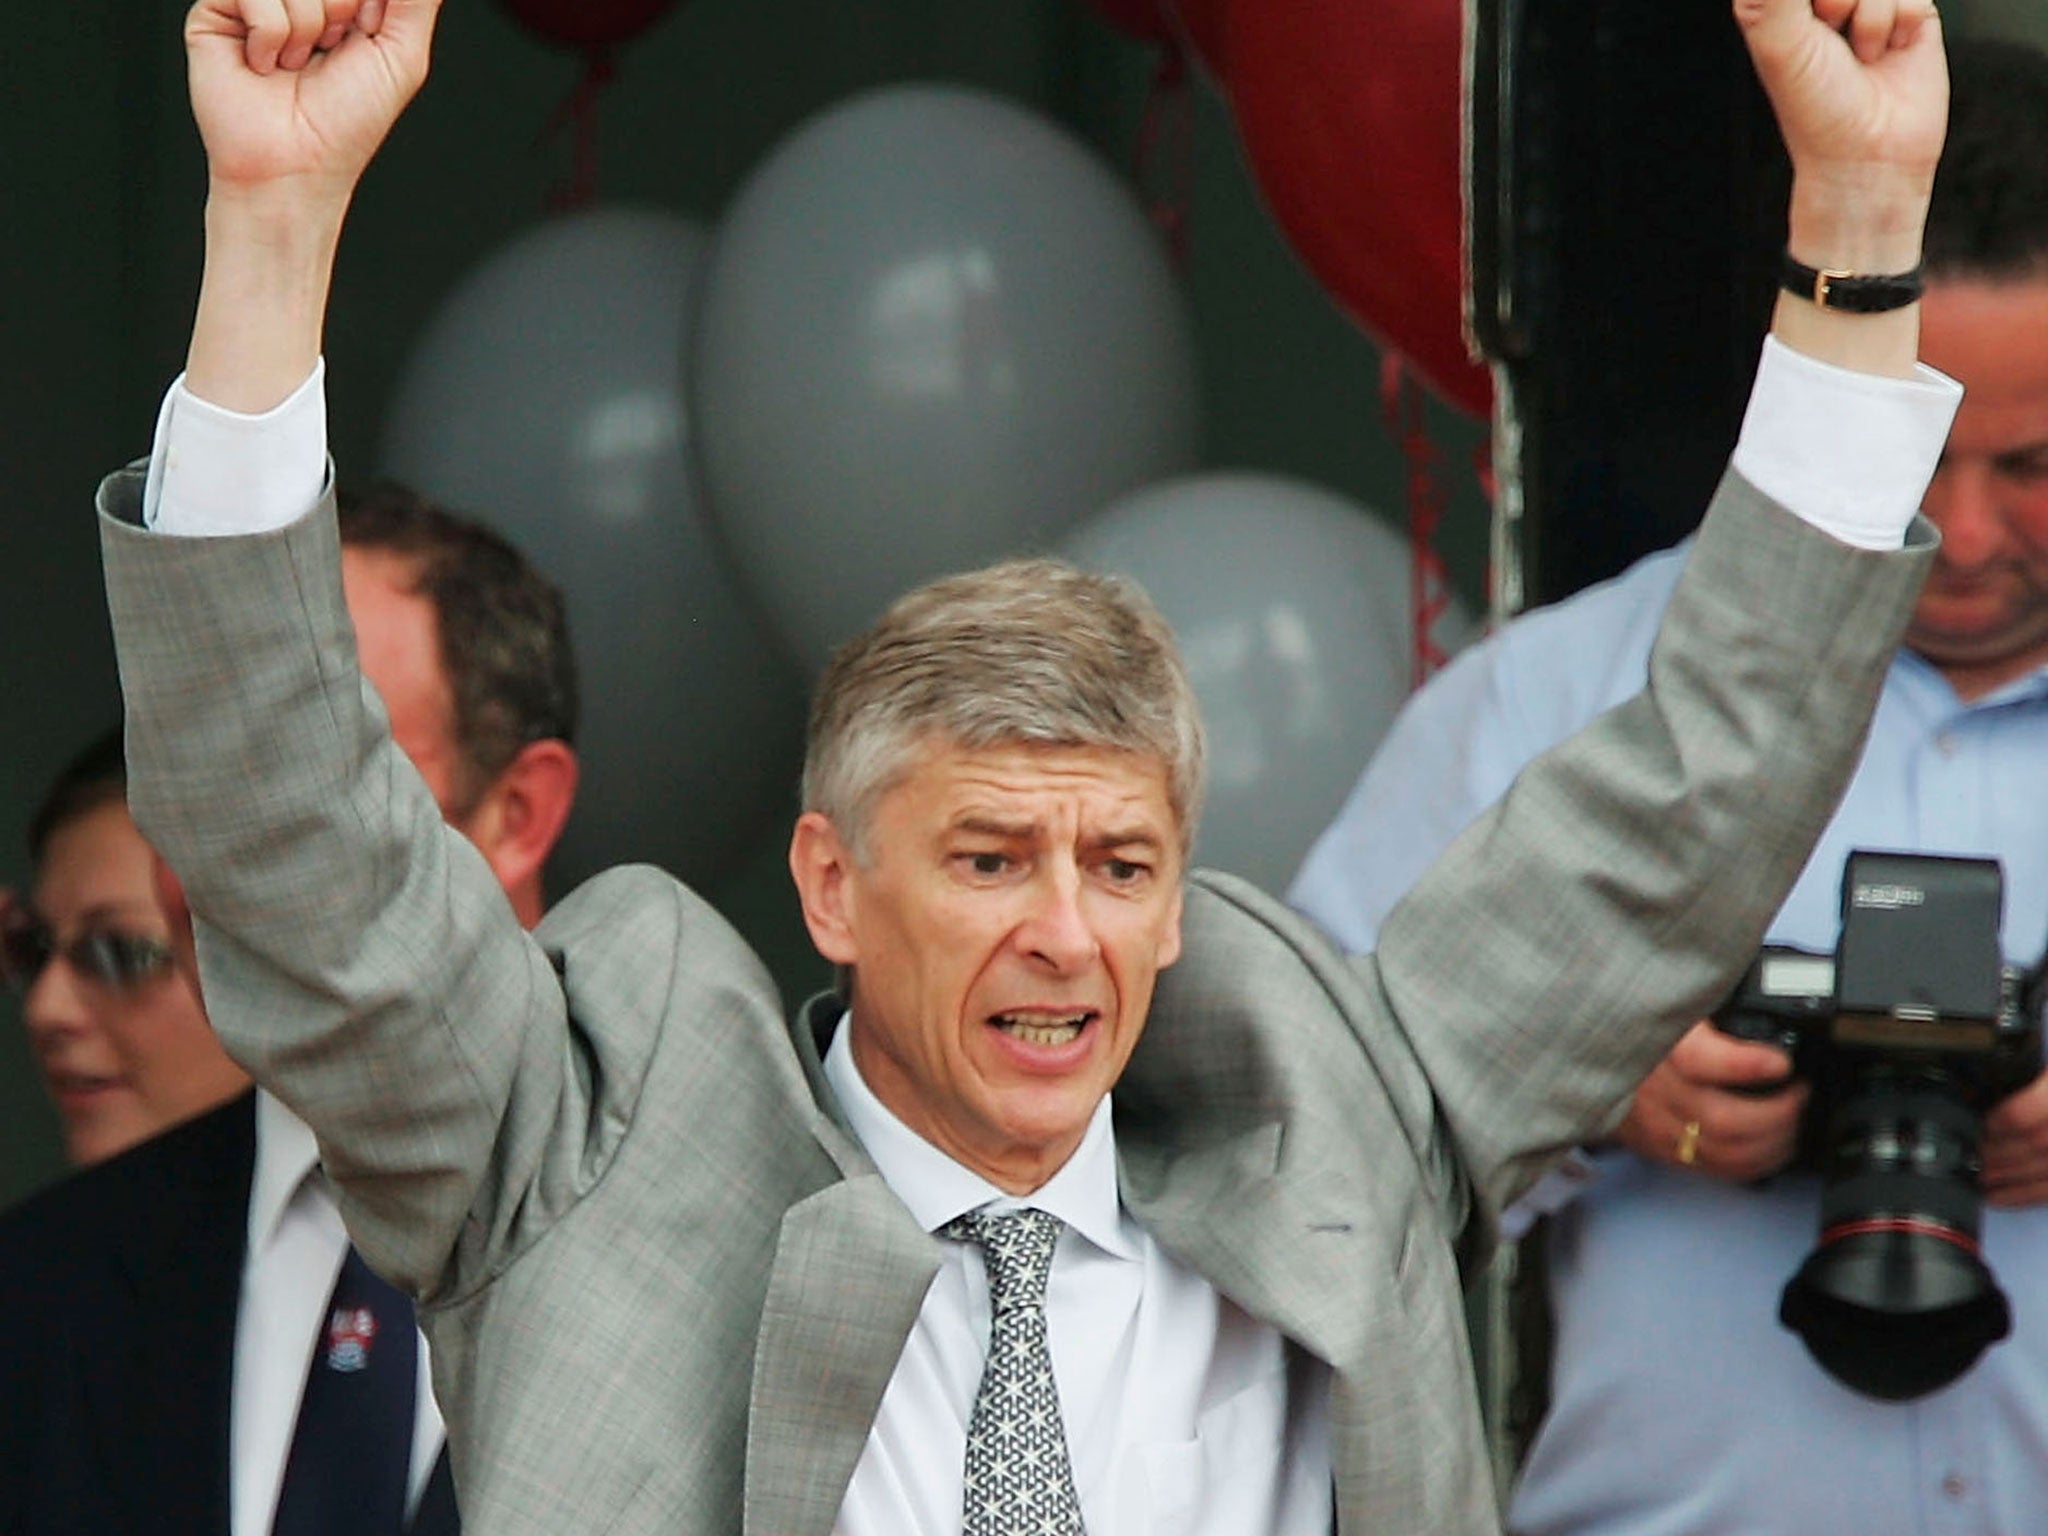 Could Arsene Wenger be celebrating again on 24 May?